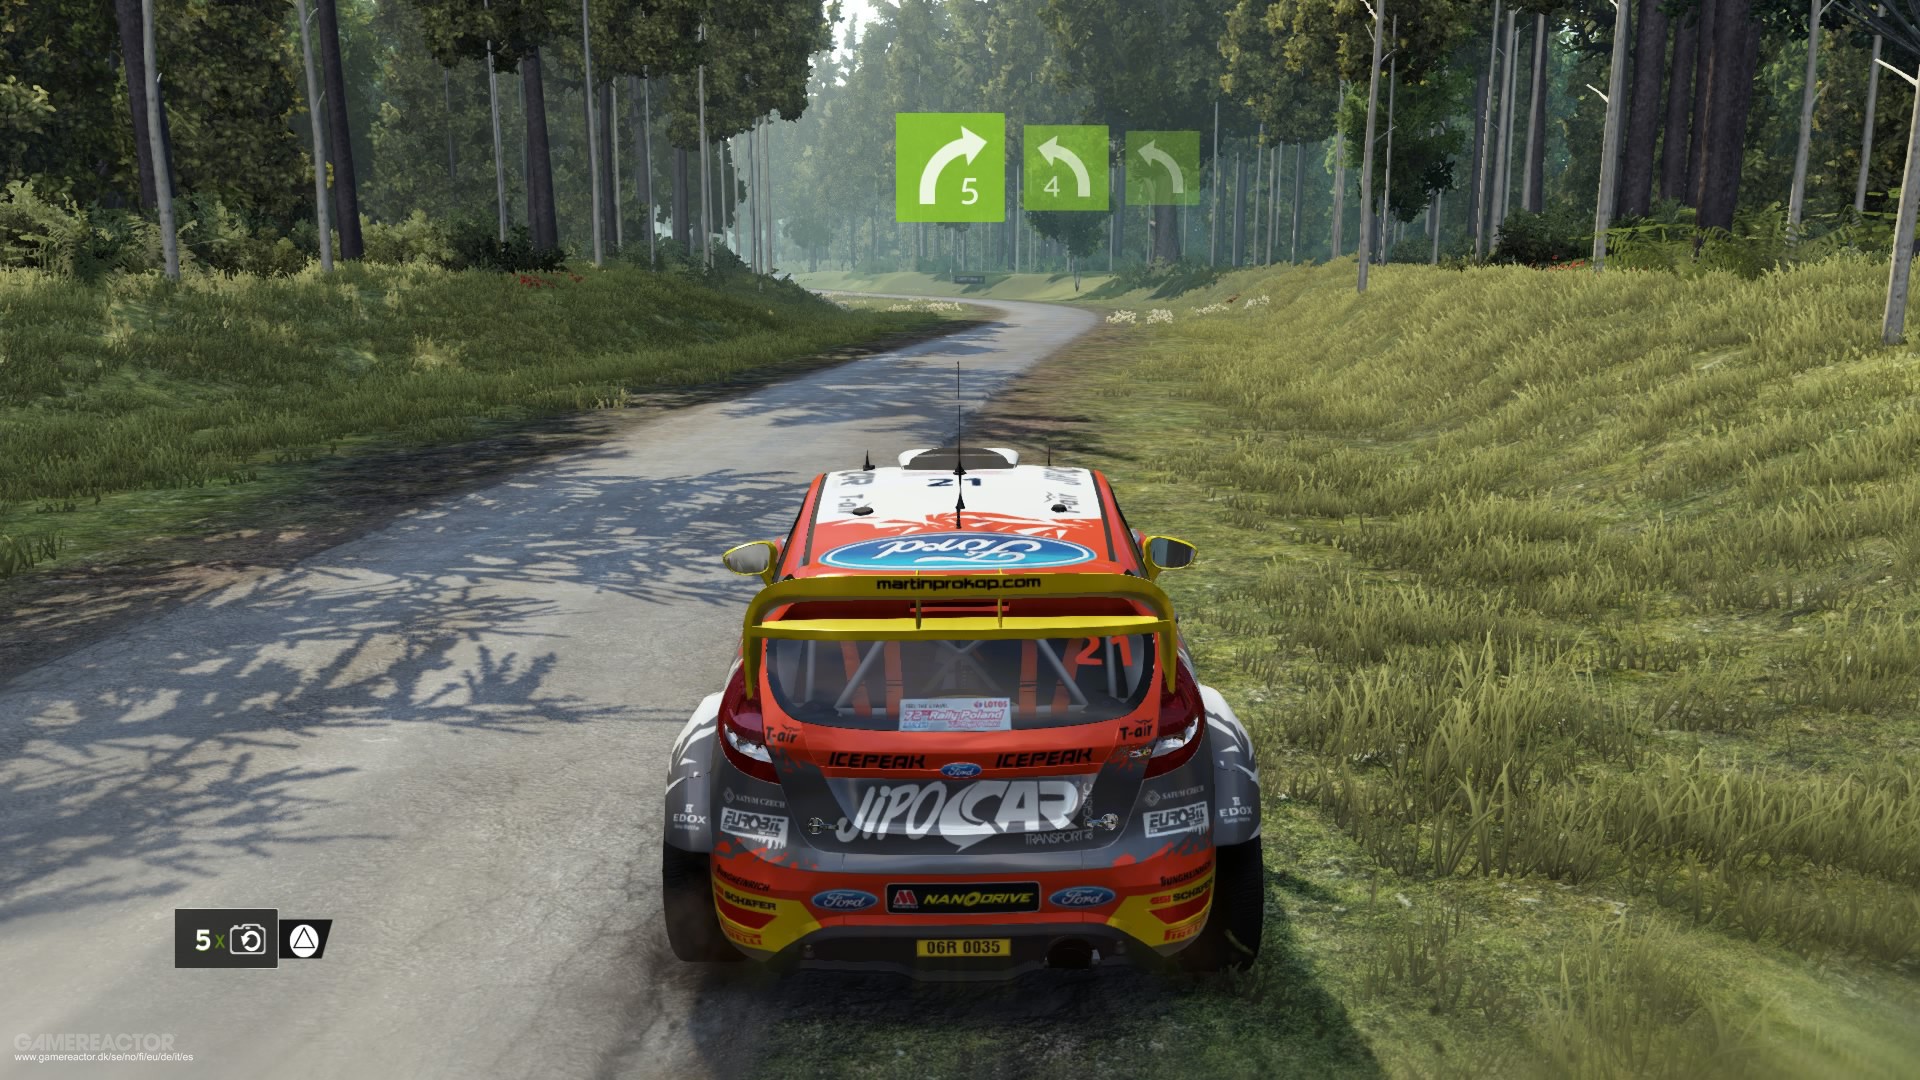 Wrc 5 pc download utorrent for free spider man 2 gc iso torrents